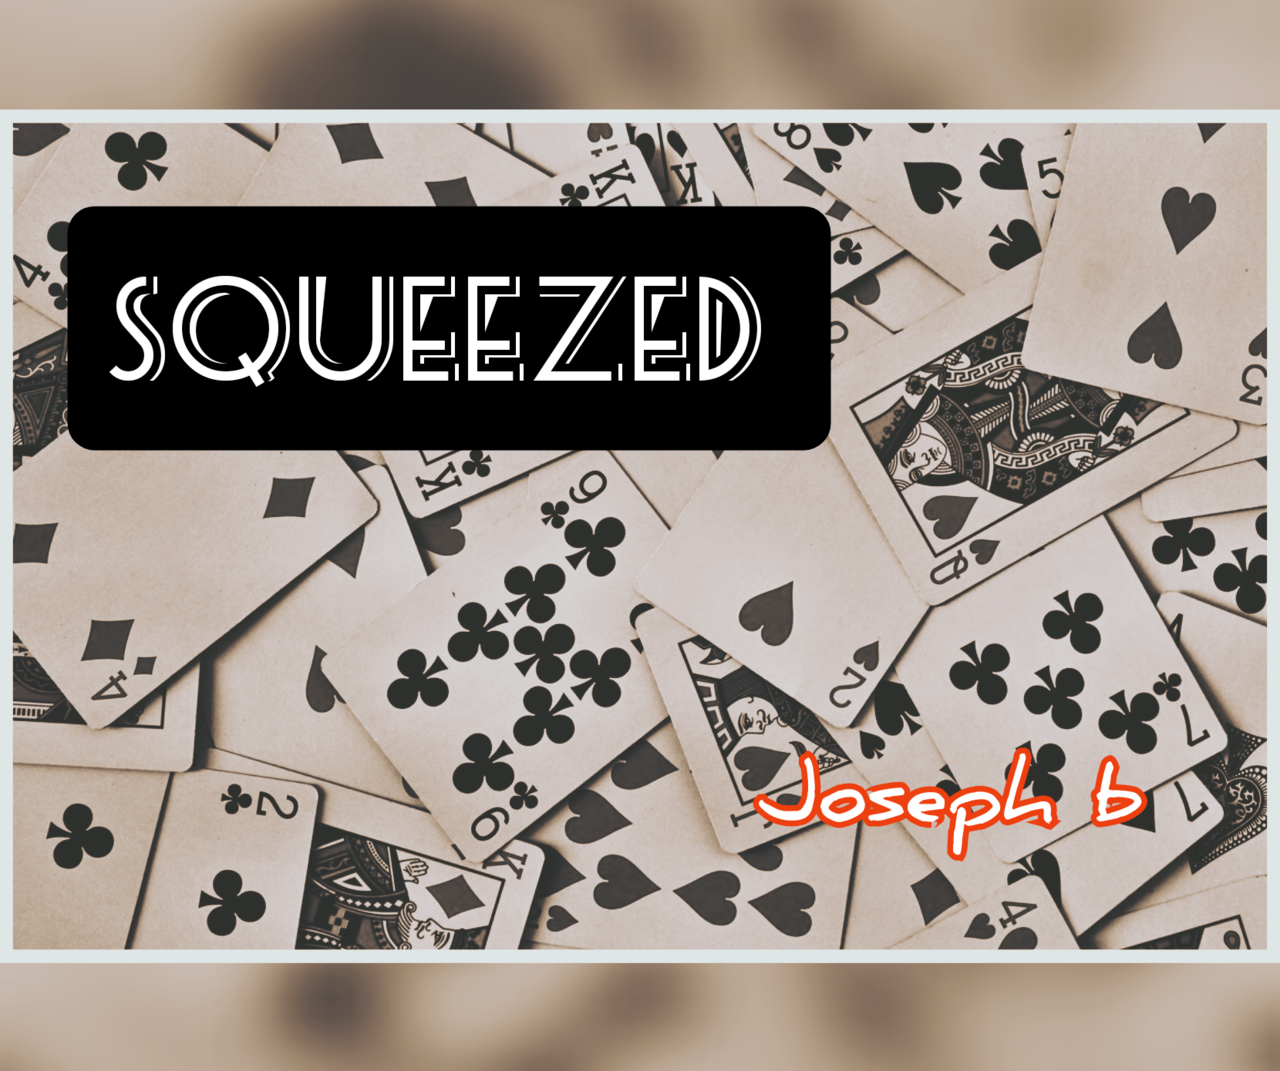 Squeezed by Joseph B. (Full Download)